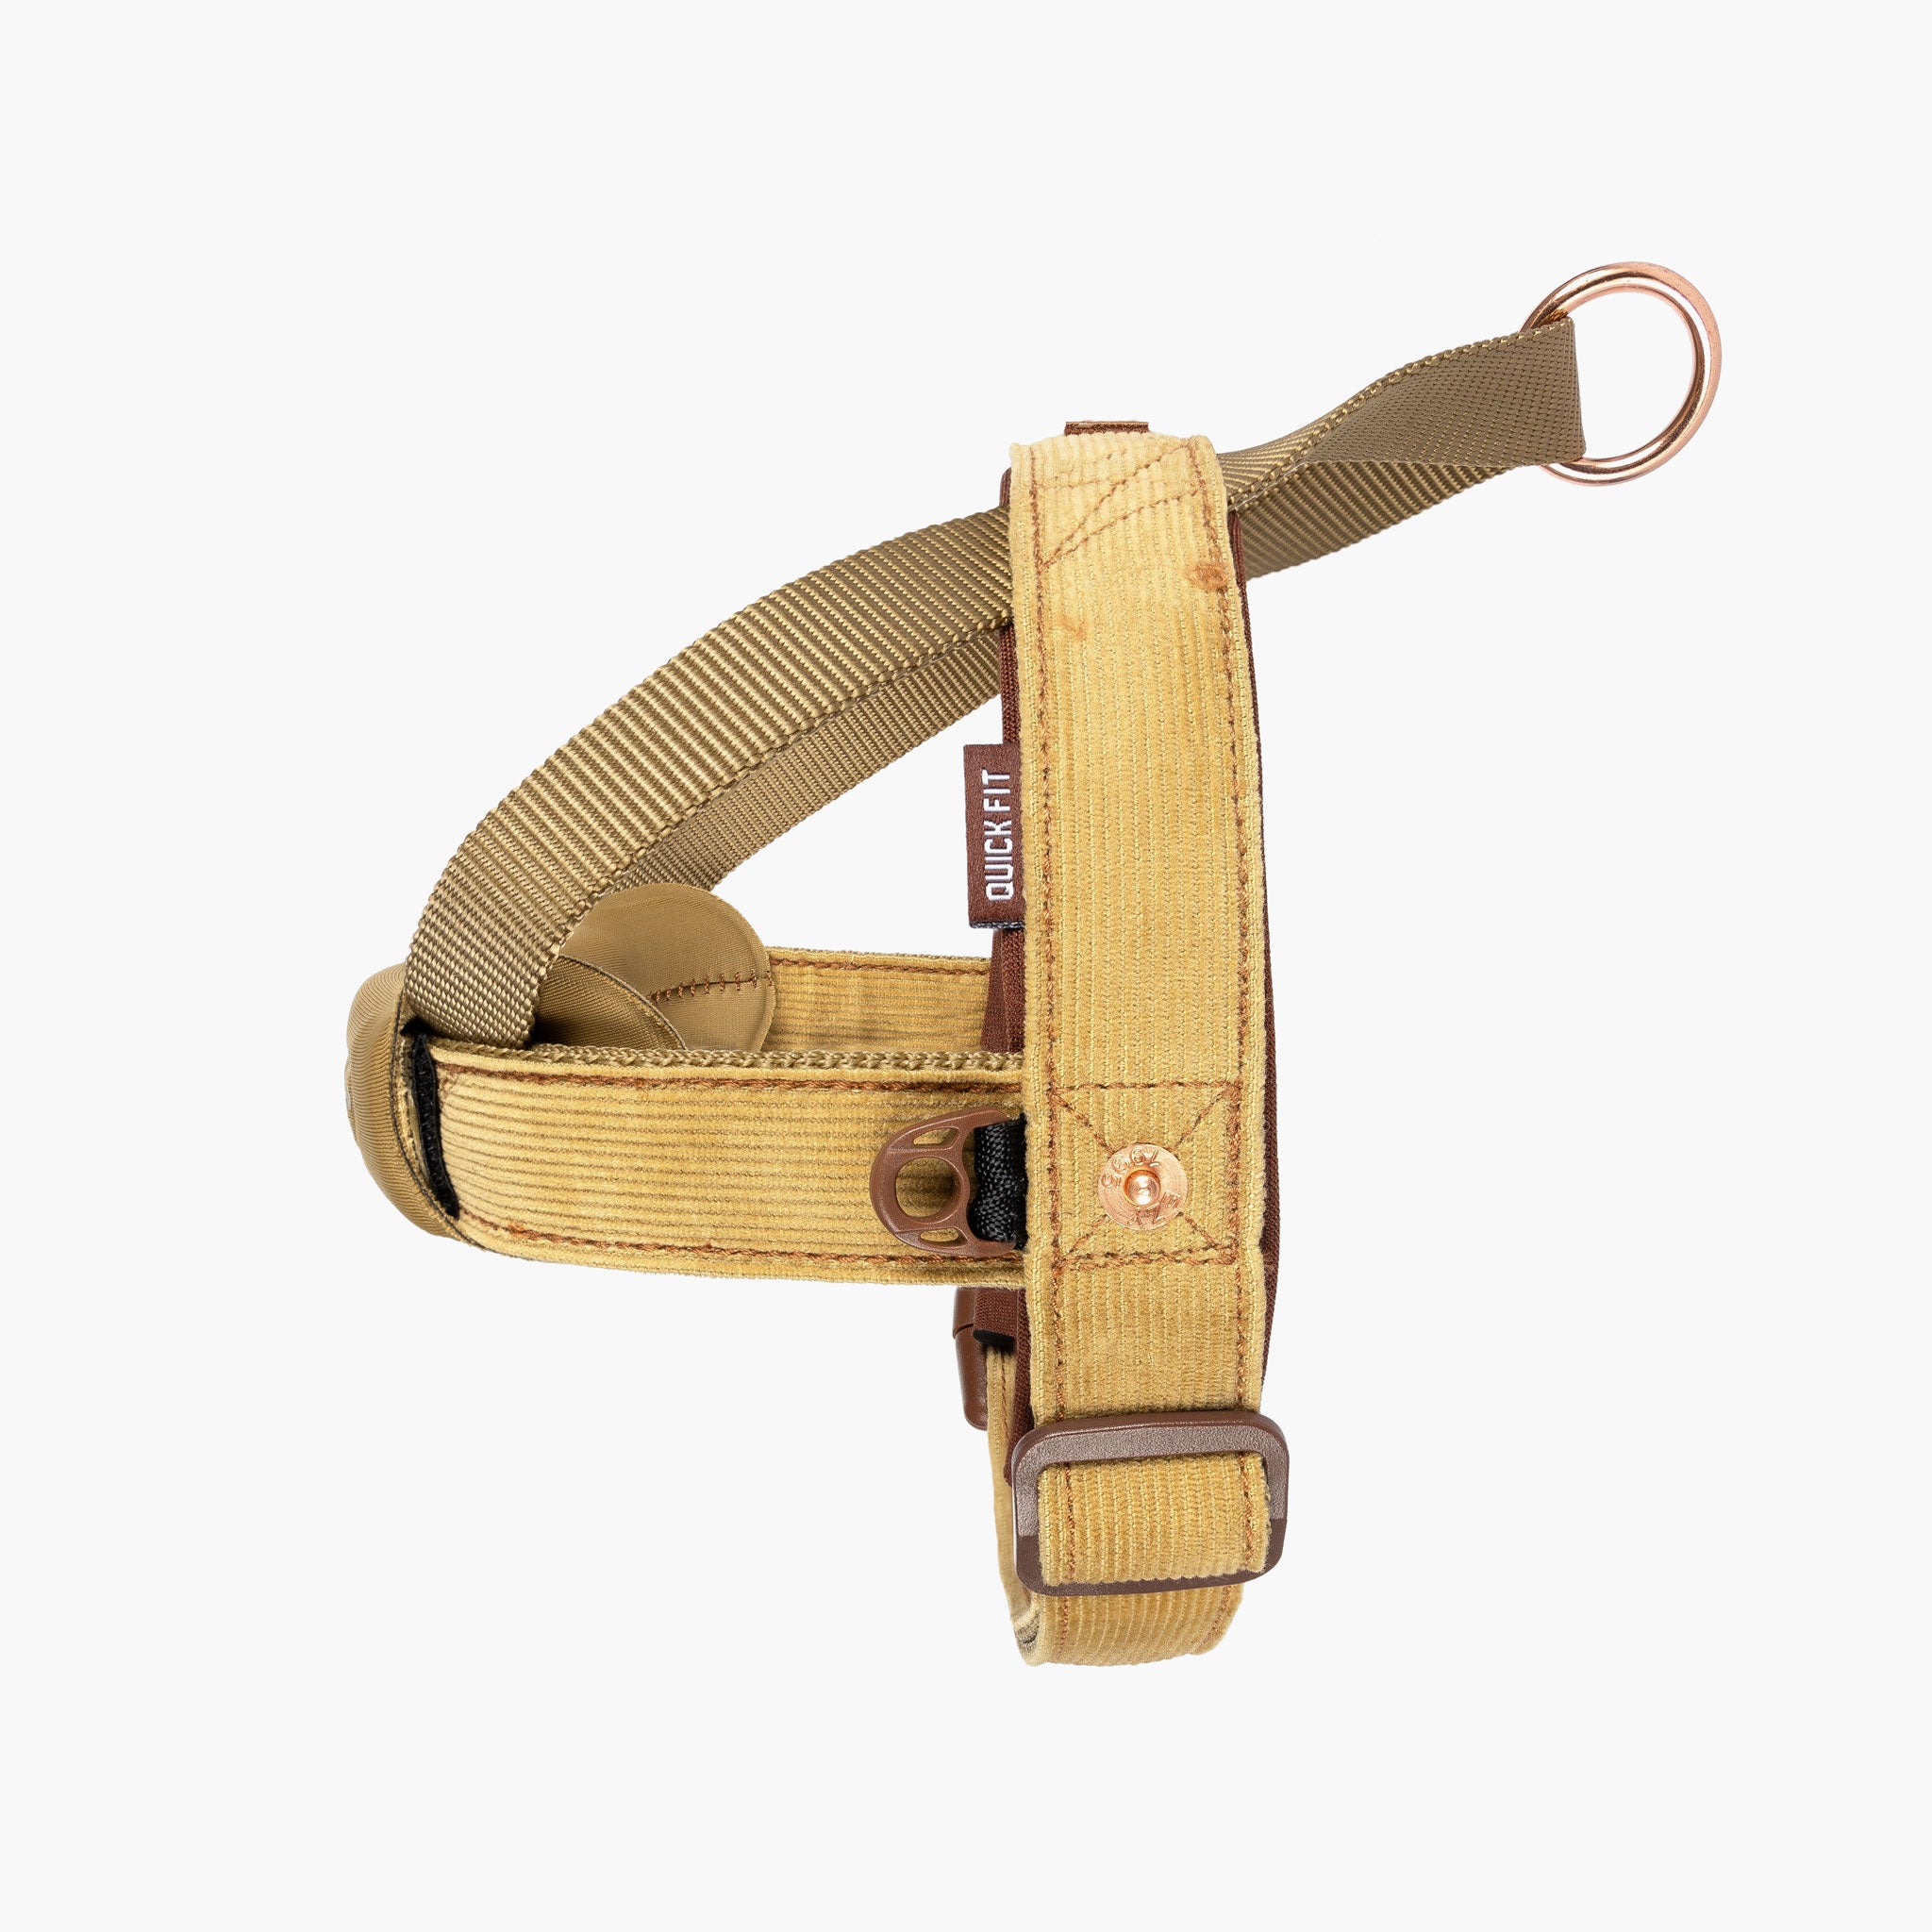 Quick Fit Harness - Corduroy